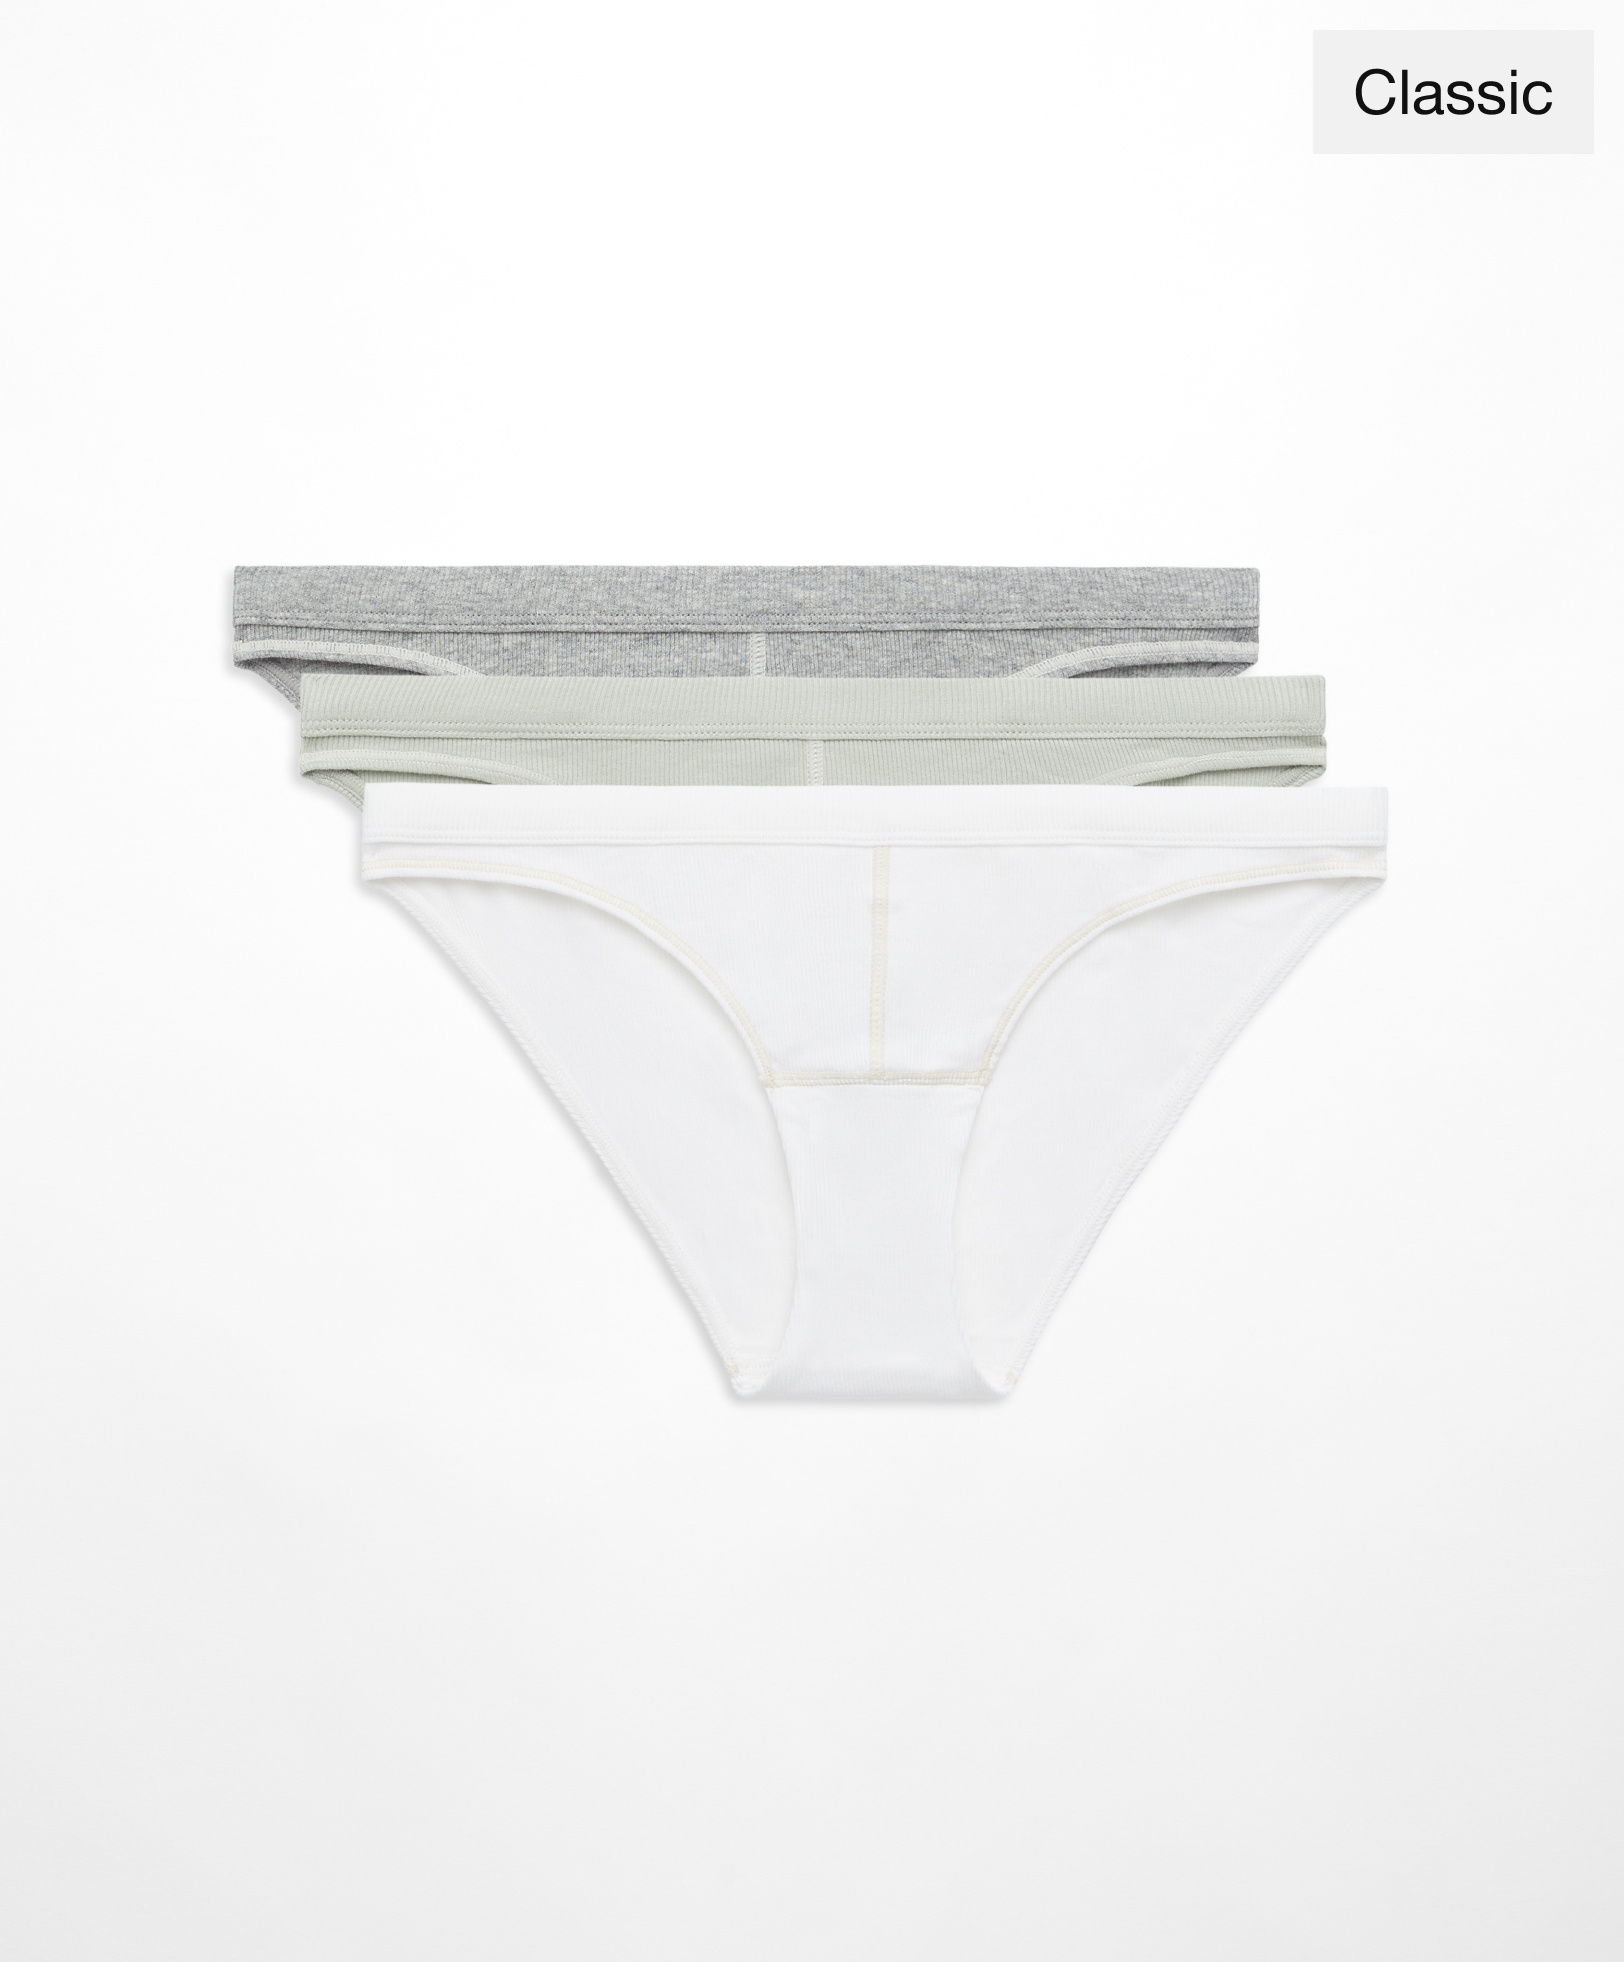 3 contrast rib classic briefs with cotton